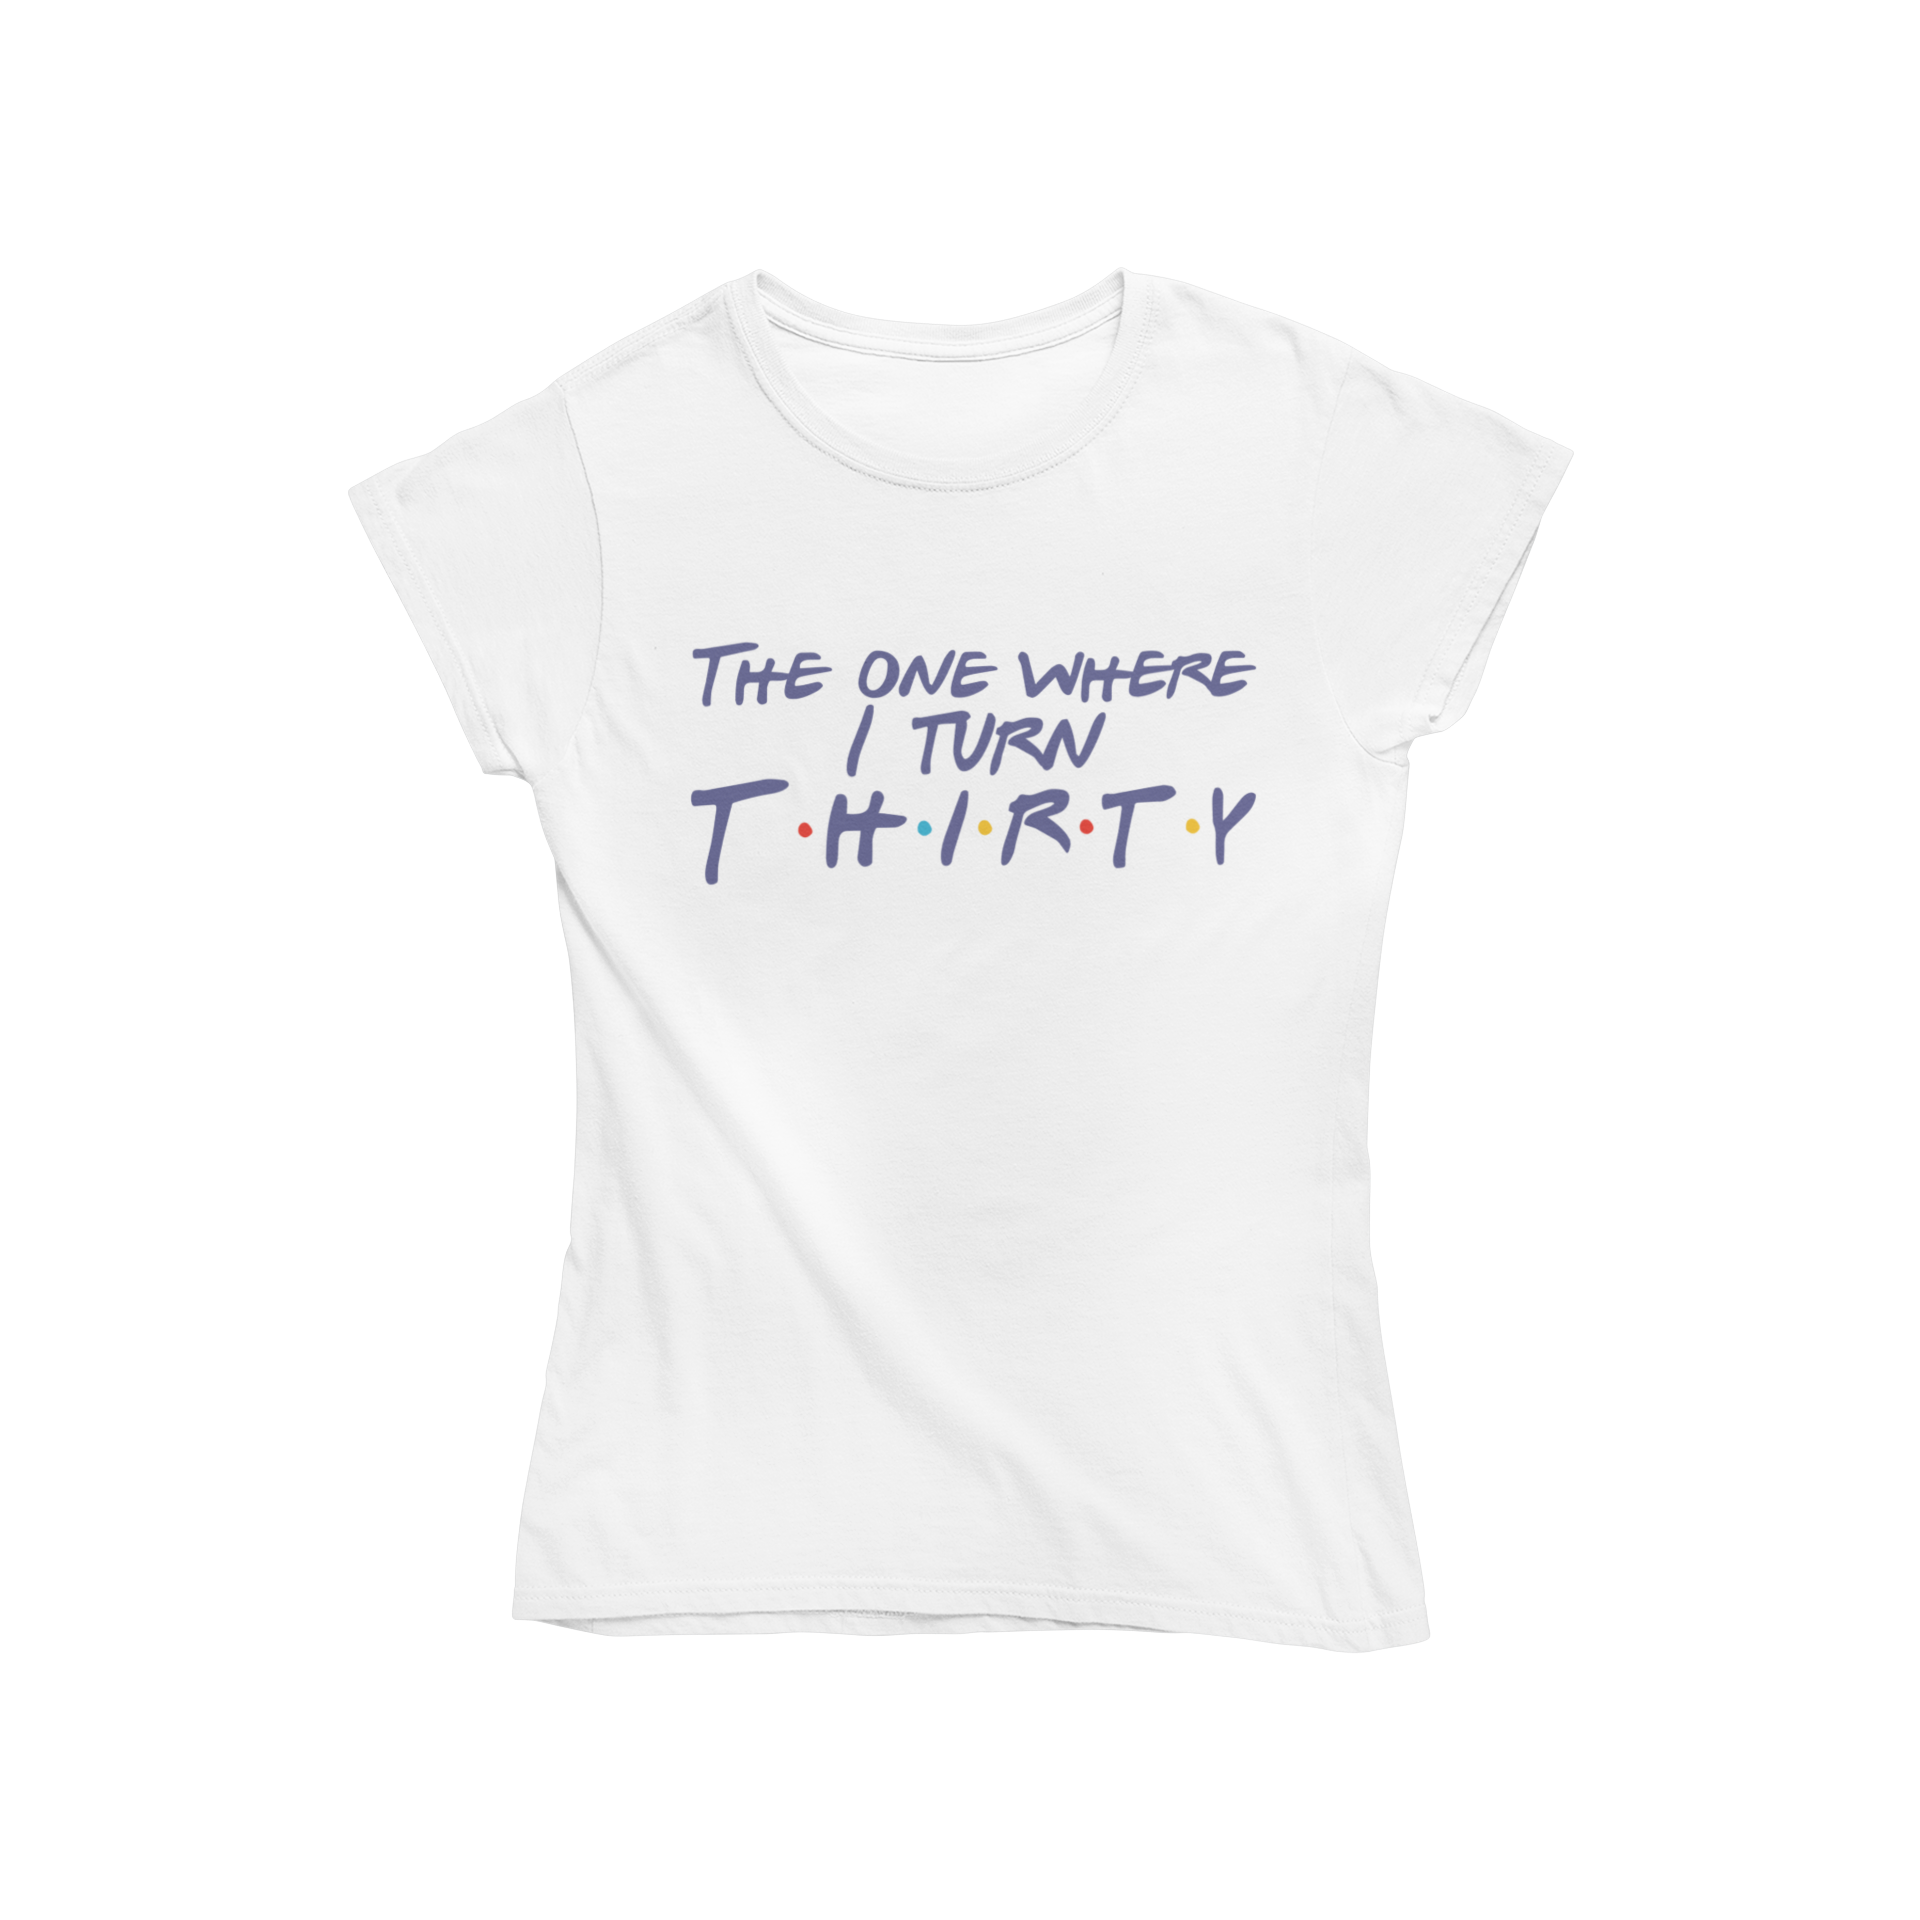 Celebrate your milestone birthday in style with our Where I Turn Thirty Women's T-shirt. This fitted tee is inspired by the iconic TV show Friends and features the famous tagline "The One Where I Turn Thirty." You'll love the soft and comfortable fabric and the perfect fit, making it the ultimate choice for any Friends fan. Whether you're hitting the town with your friends or just relaxing at home, this T-shirt is the perfect way to commemorate your special day.